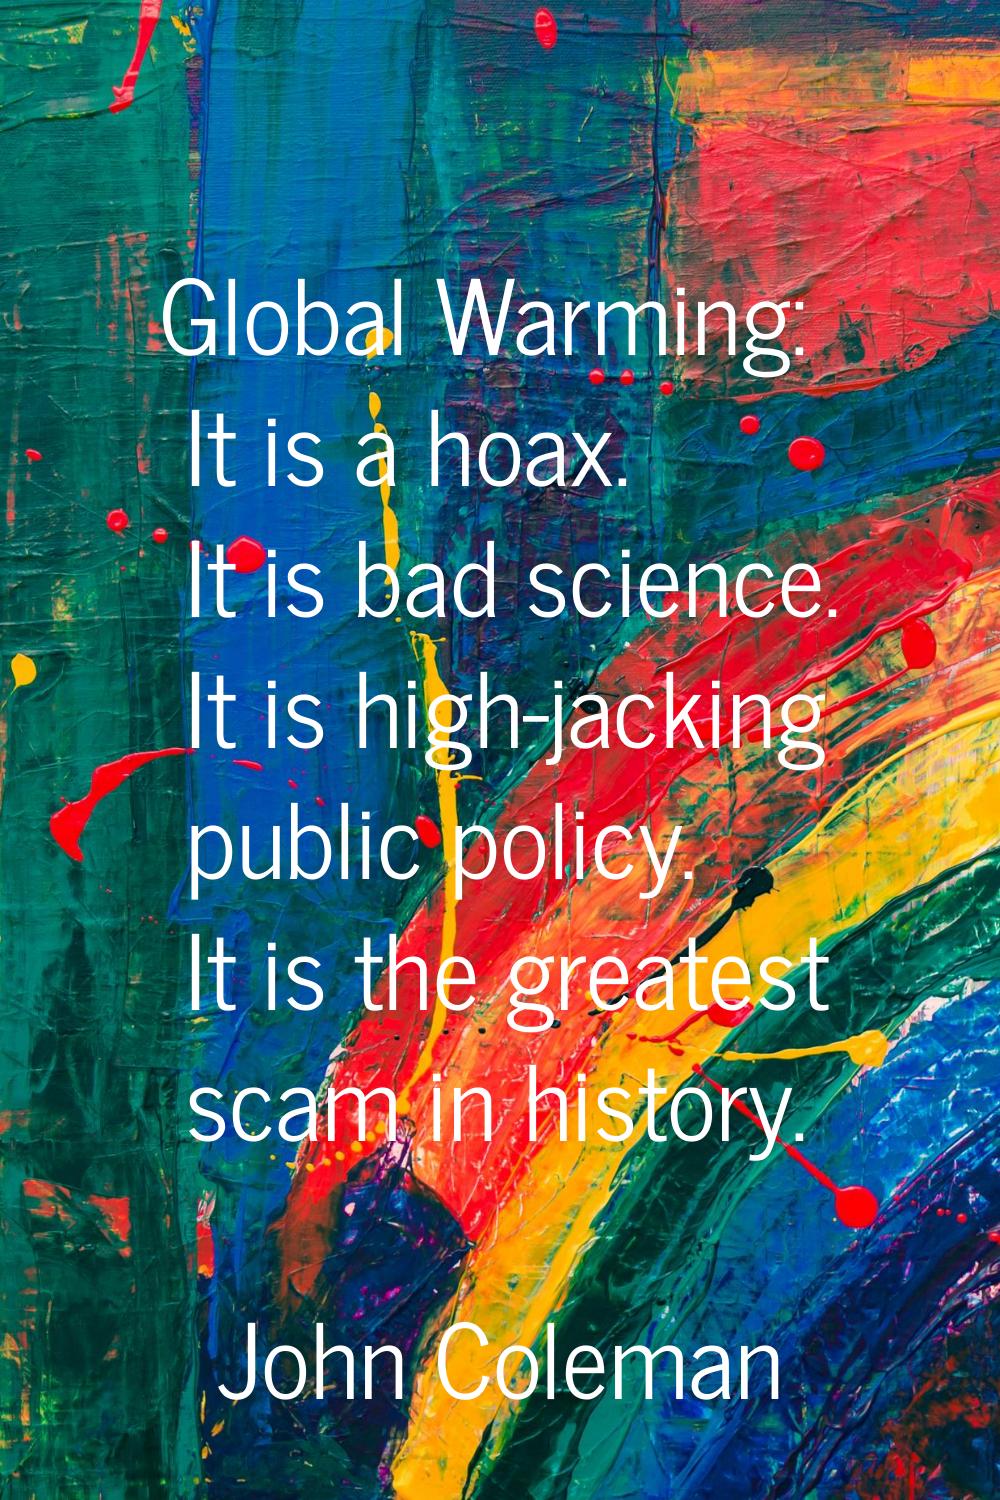 Global Warming: It is a hoax. It is bad science. It is high-jacking public policy. It is the greate